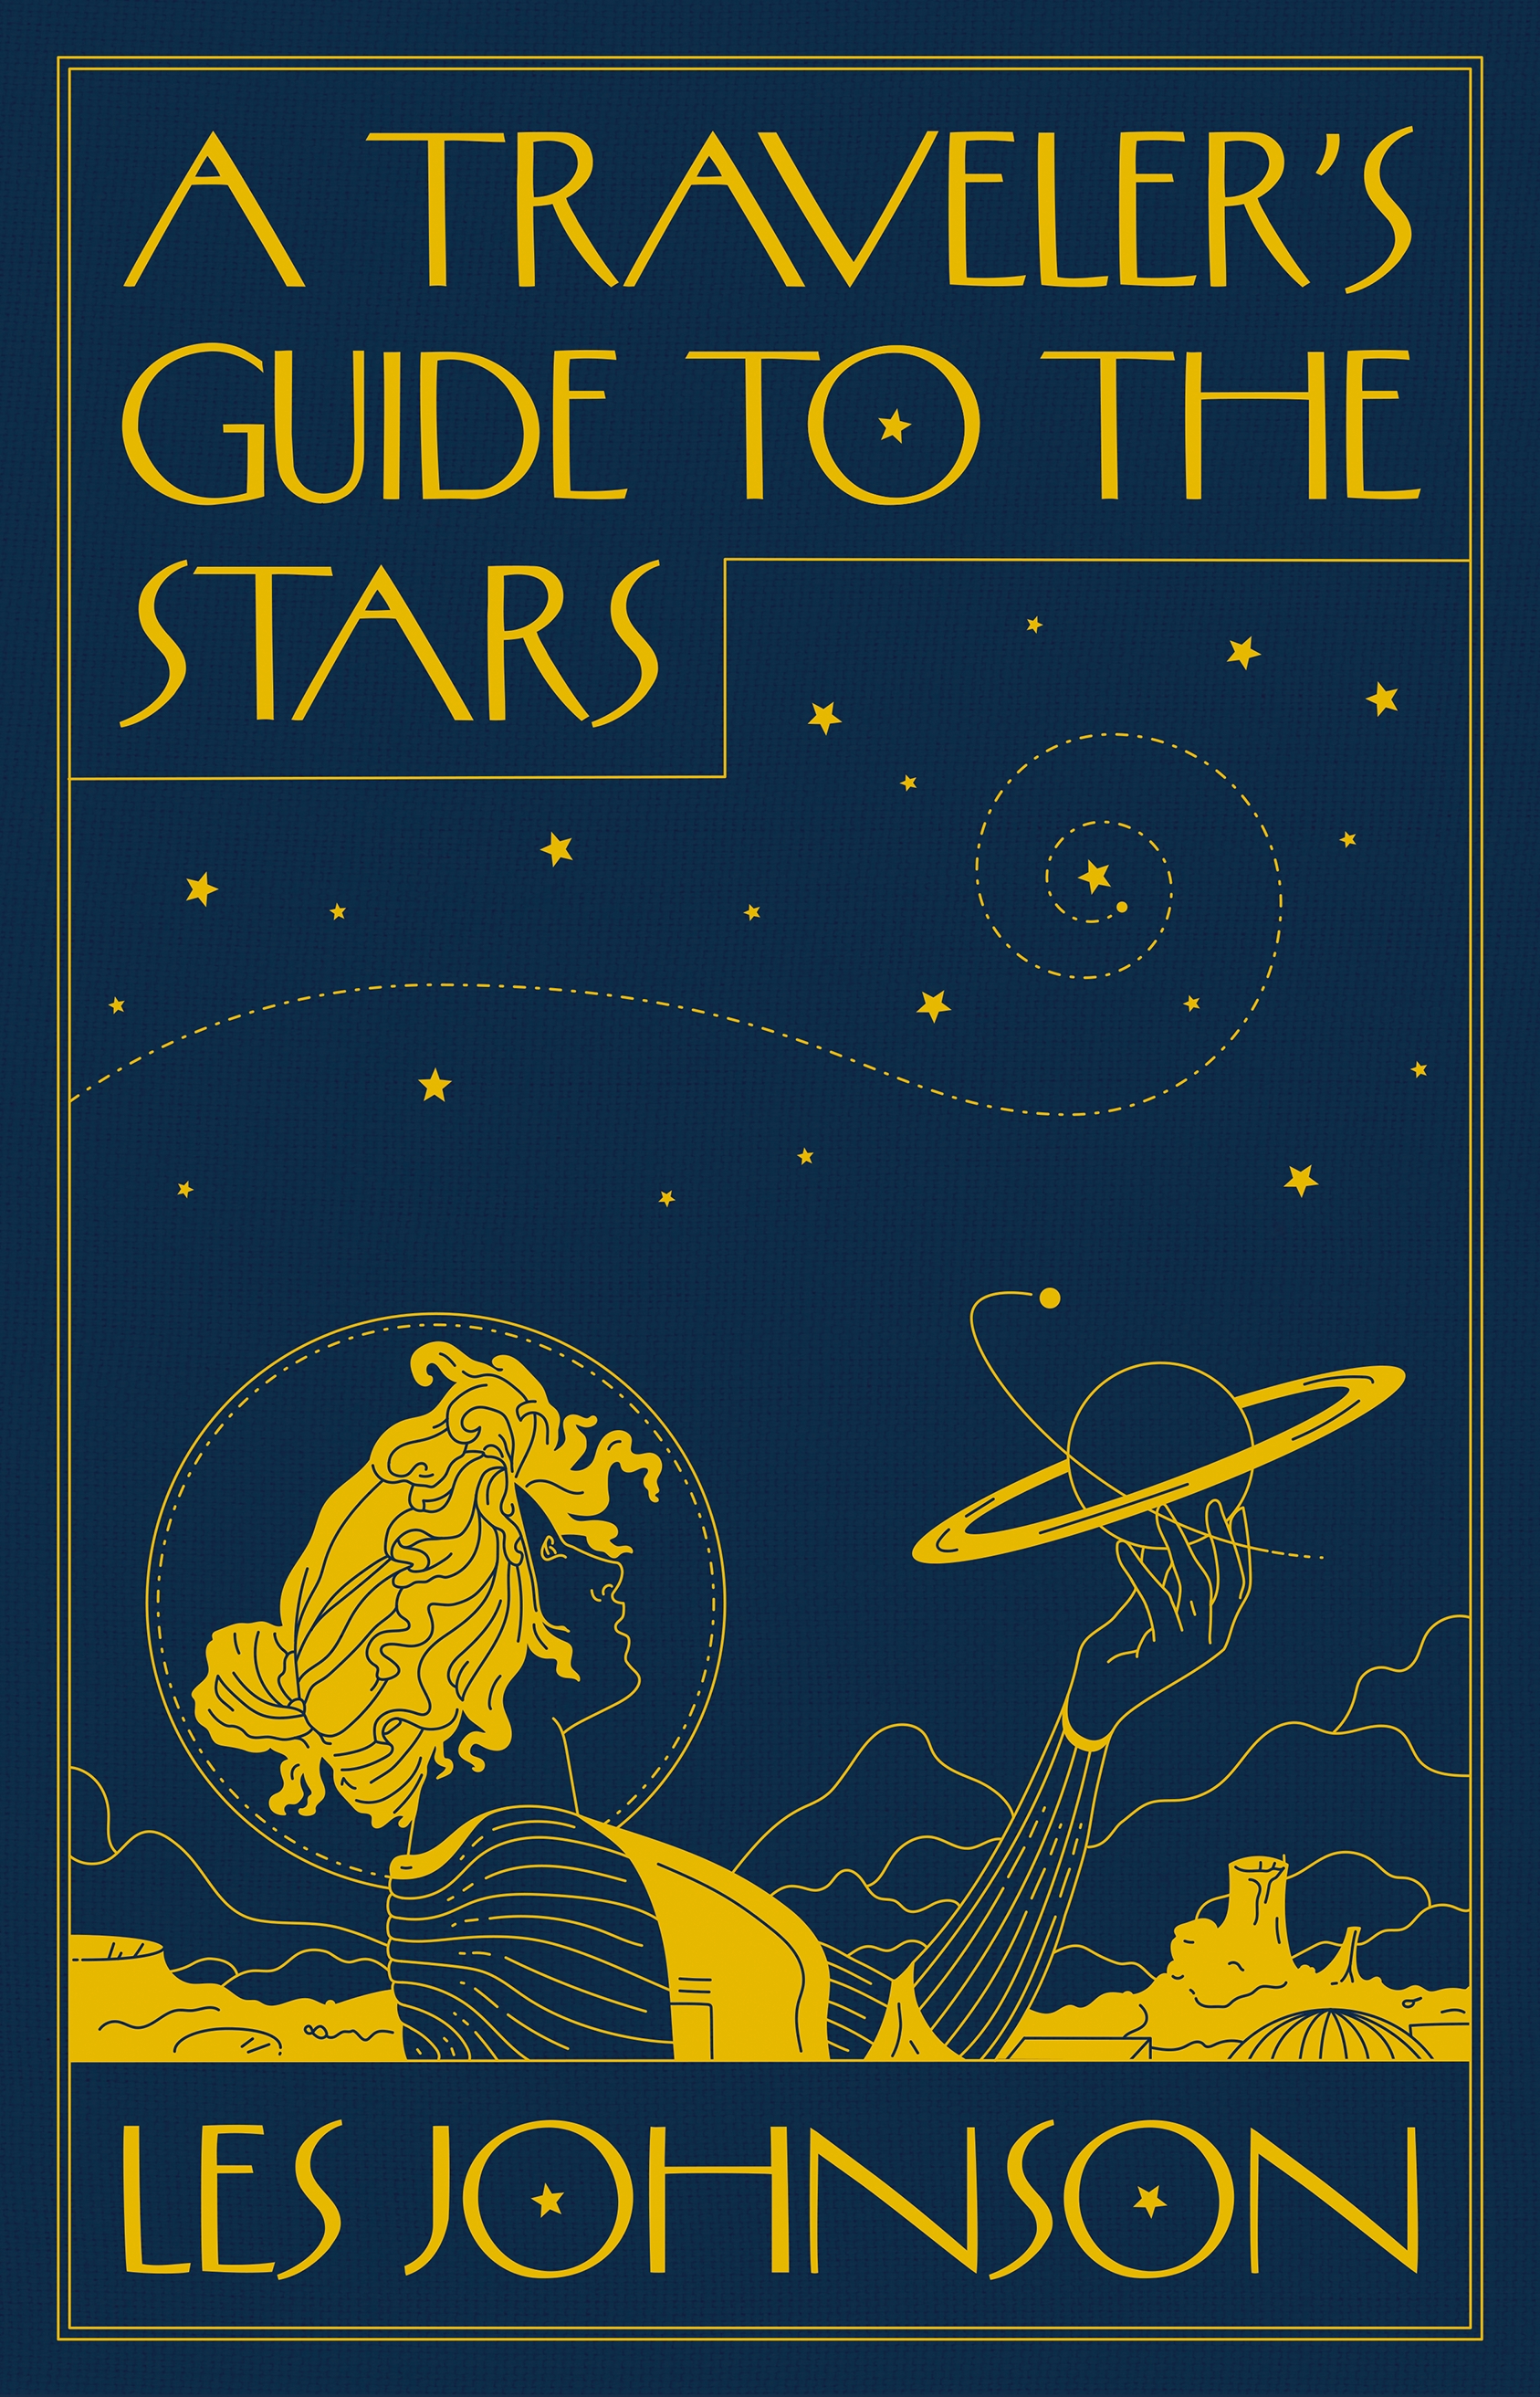 The science of stars - Reader's Digest